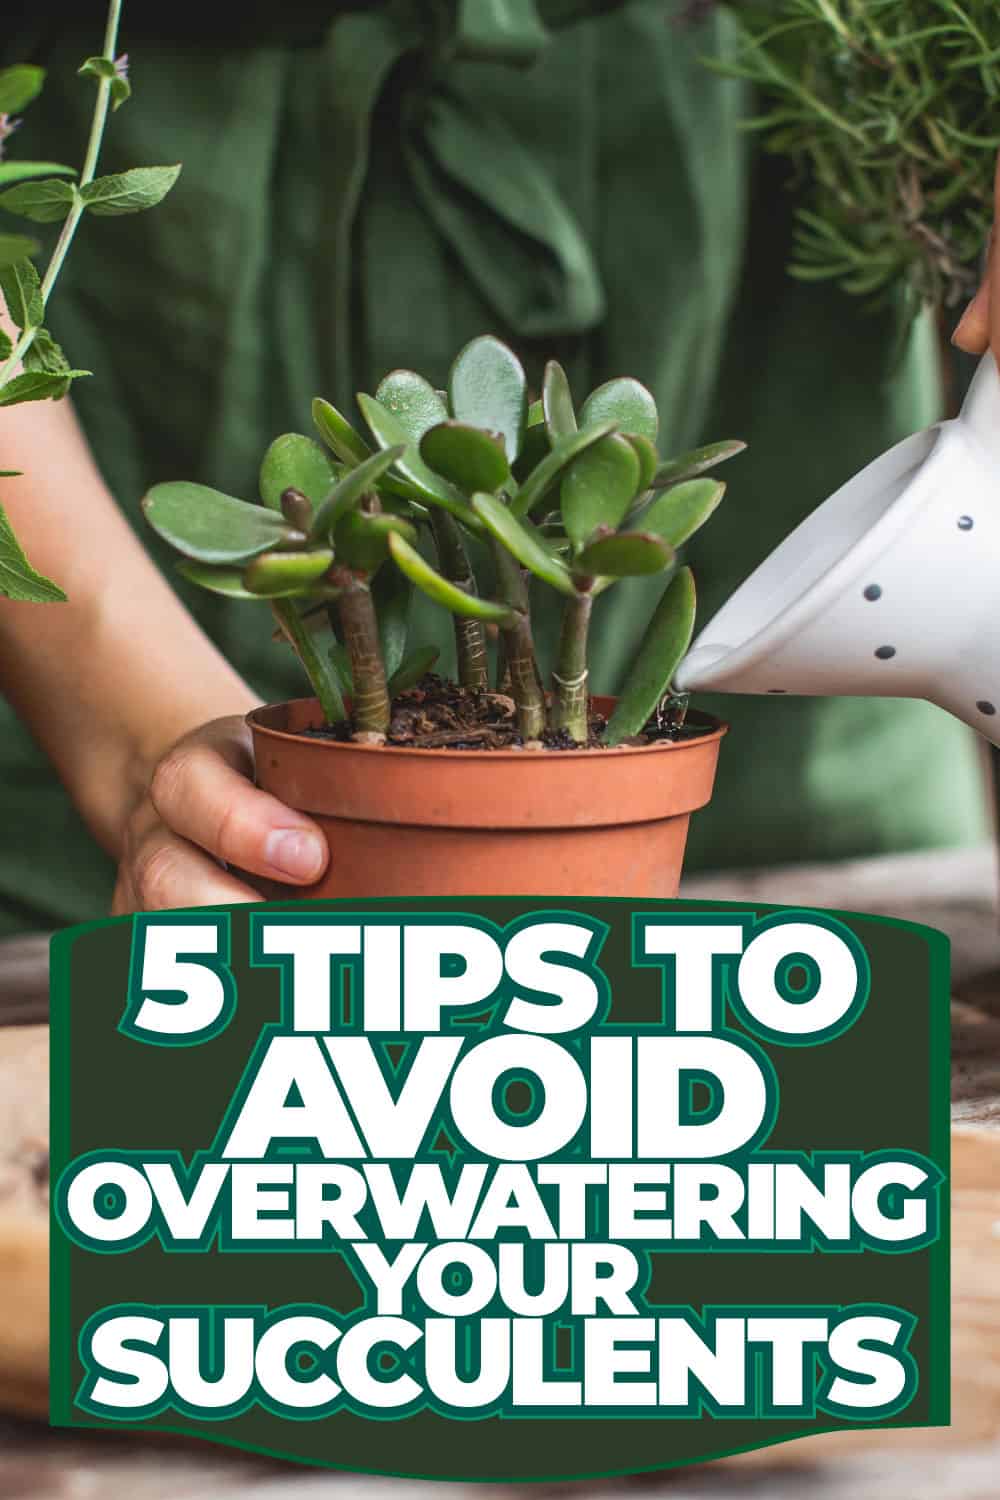 5 Tips to Avoid Overwatering Your Succulents